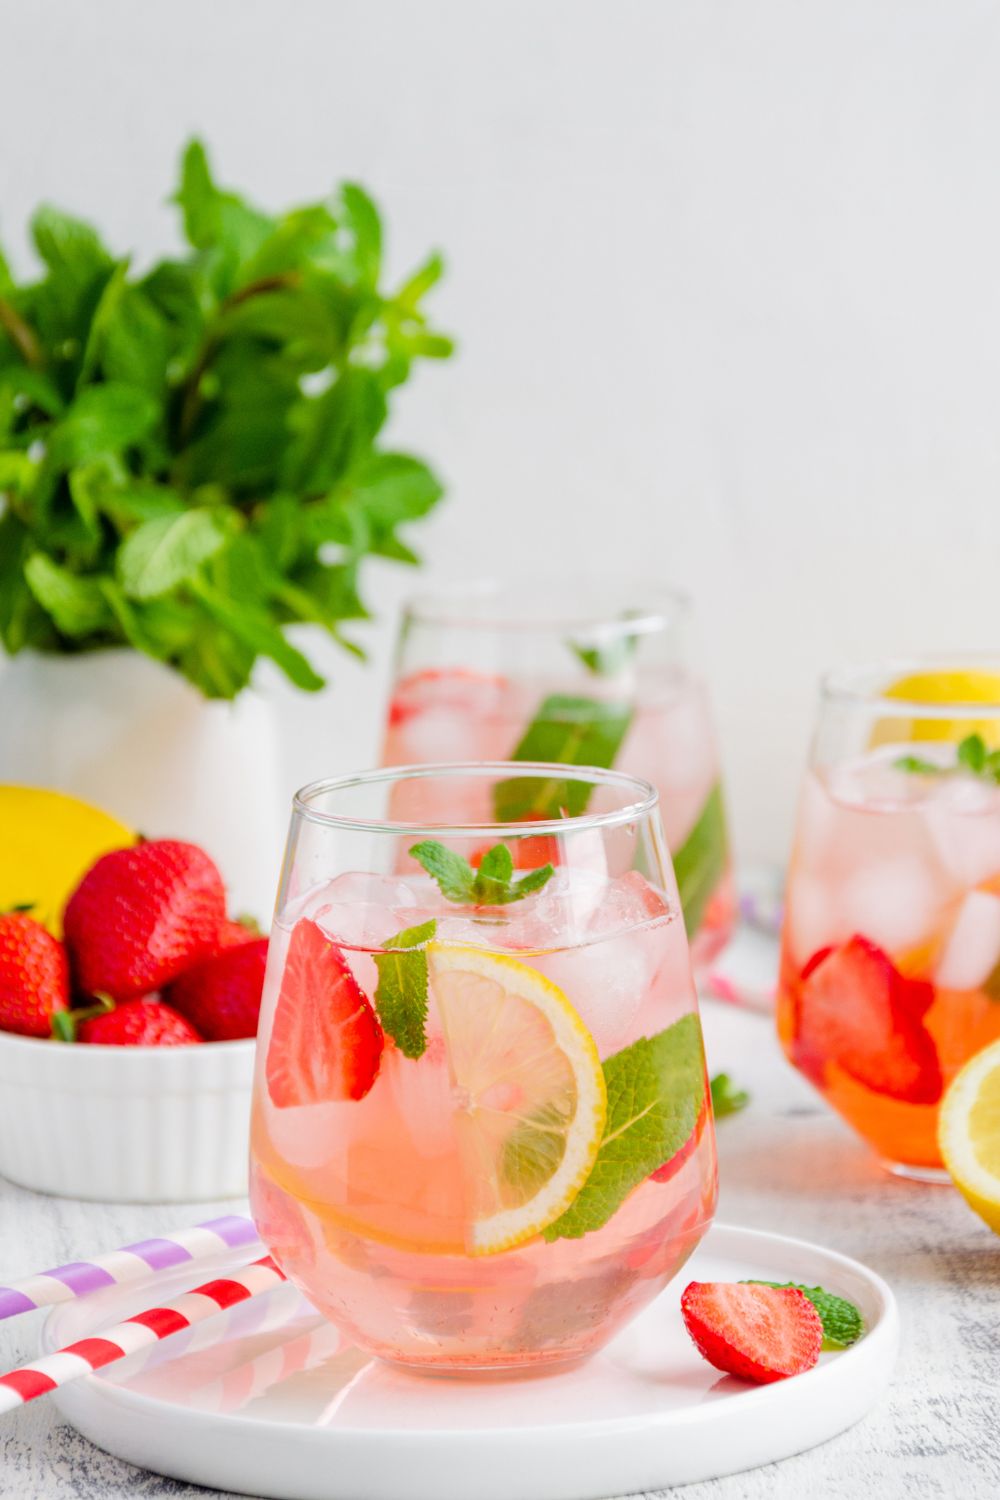 strawberry wine punch in a glass with ice, lemon slices, strawberry slices, and mint.